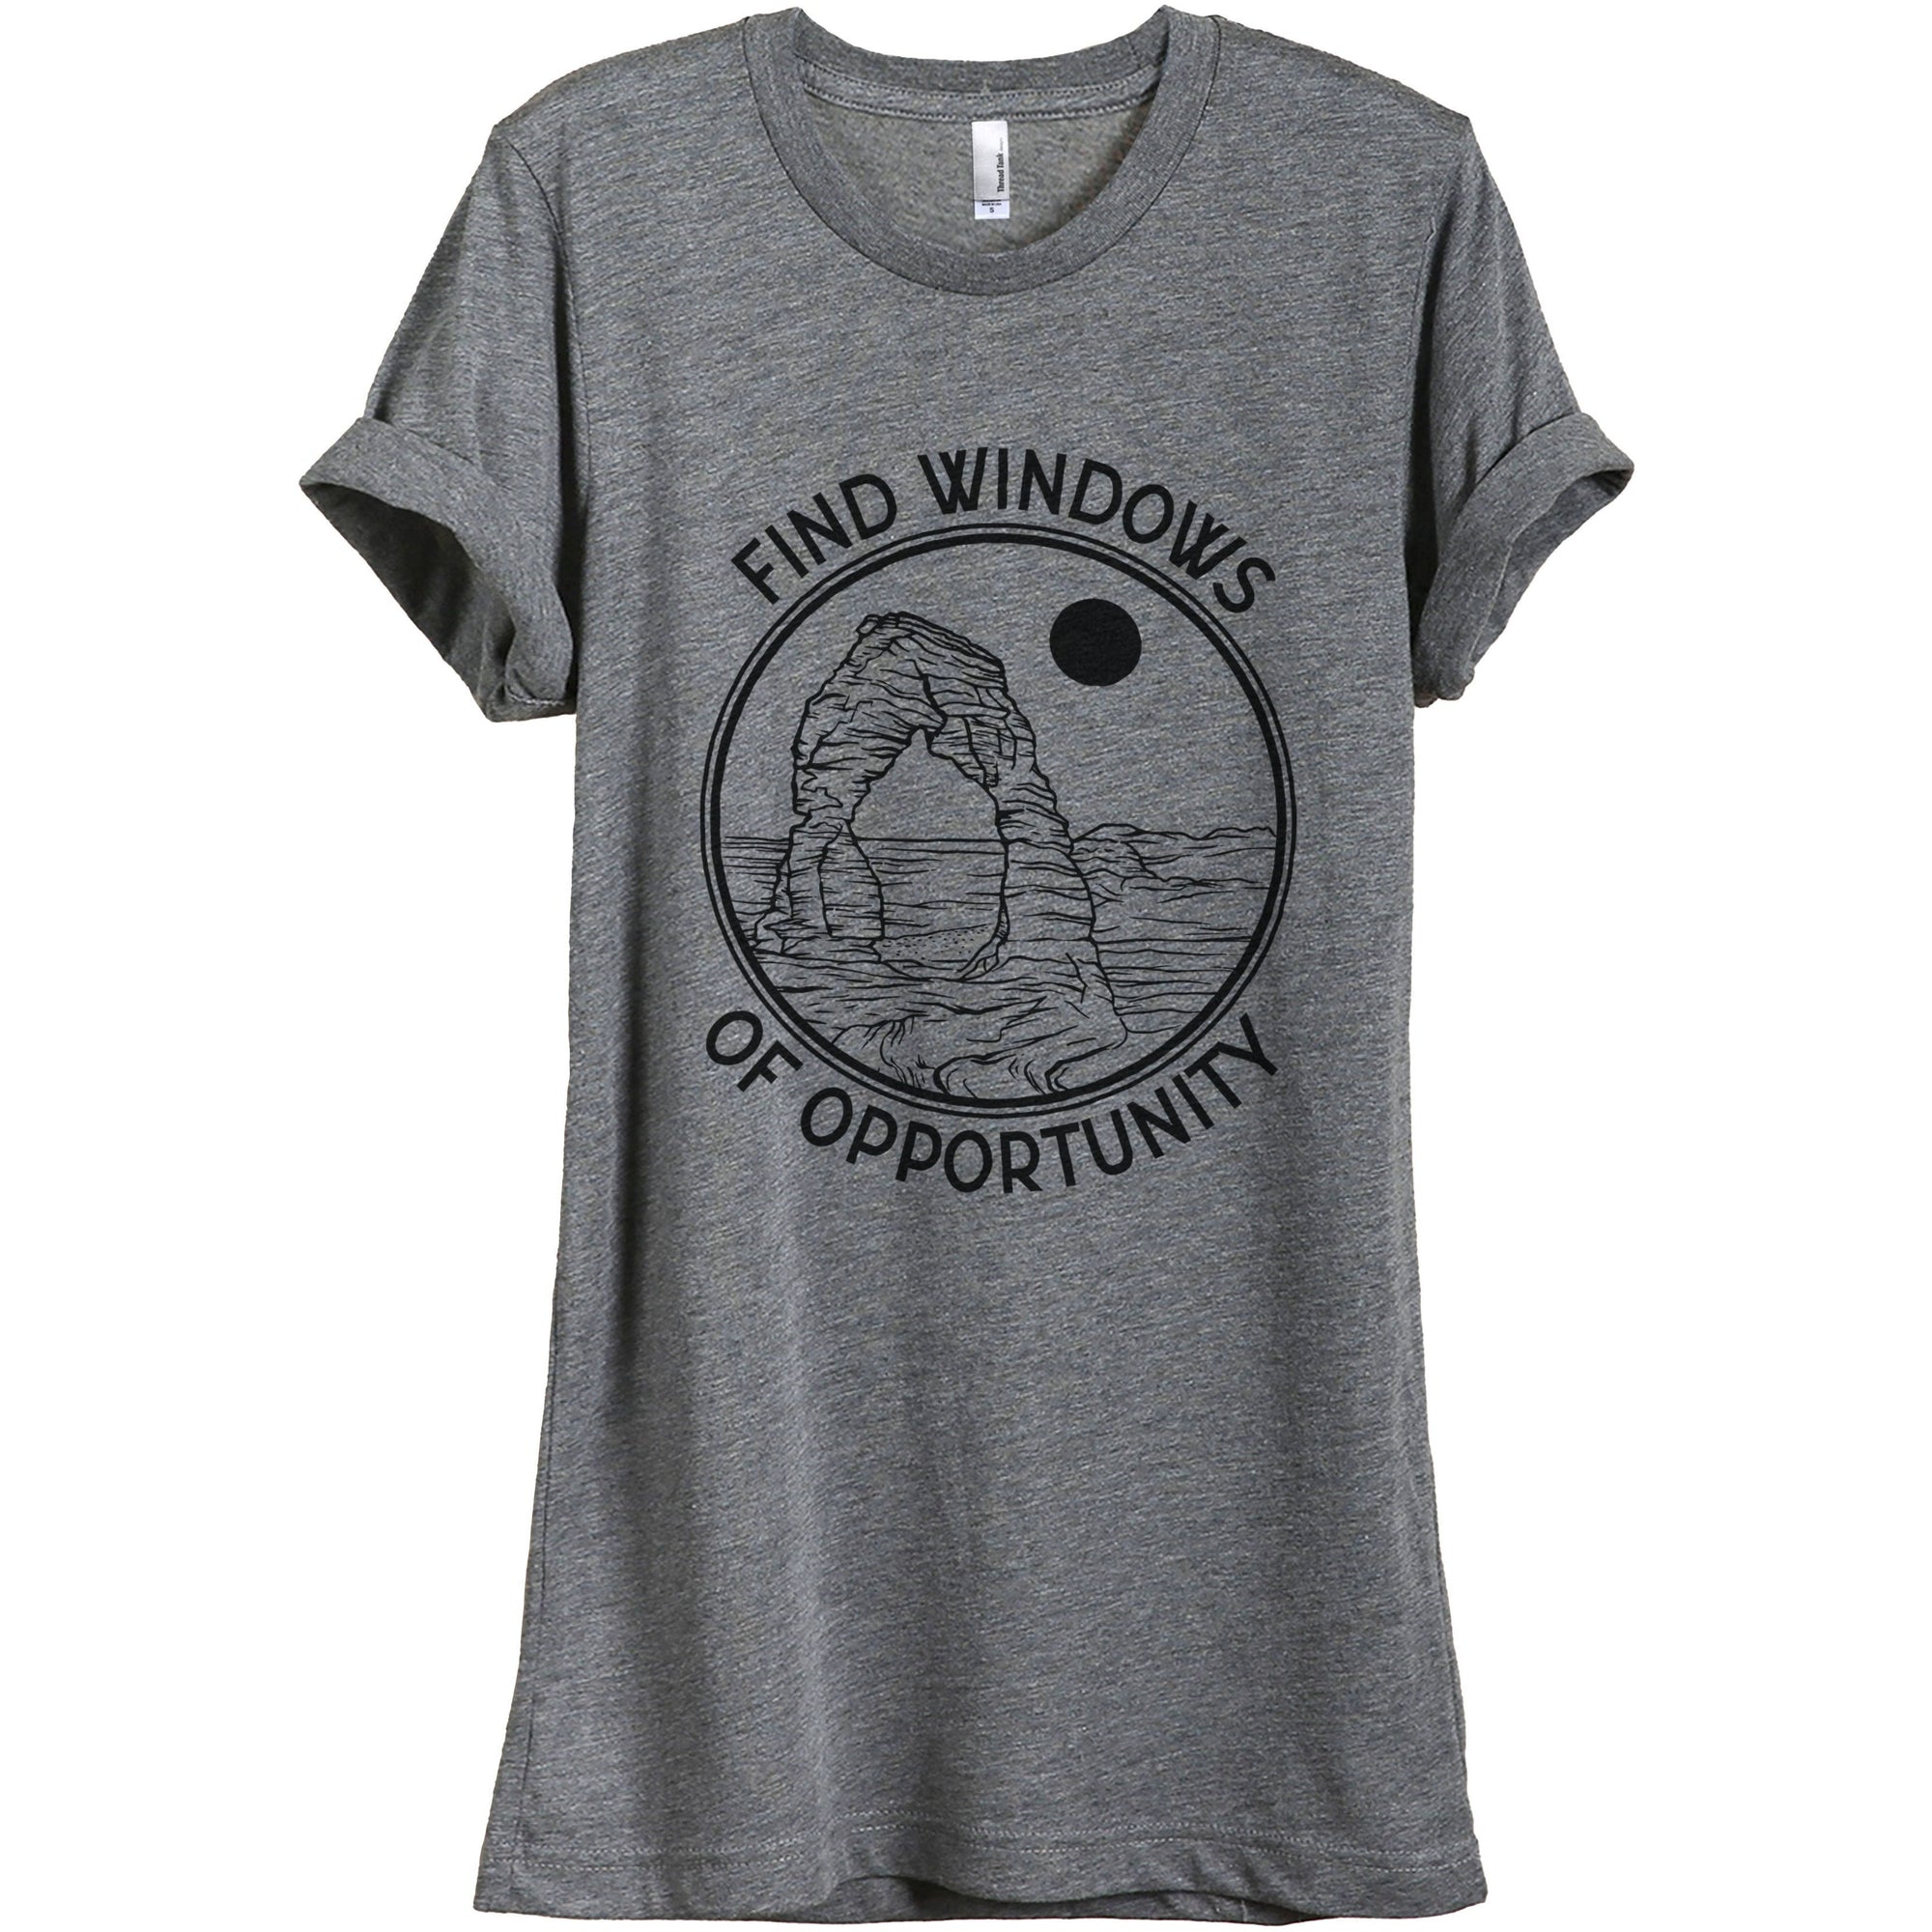 Find Windows Of Opportunity - thread tank | Stories you can wear.